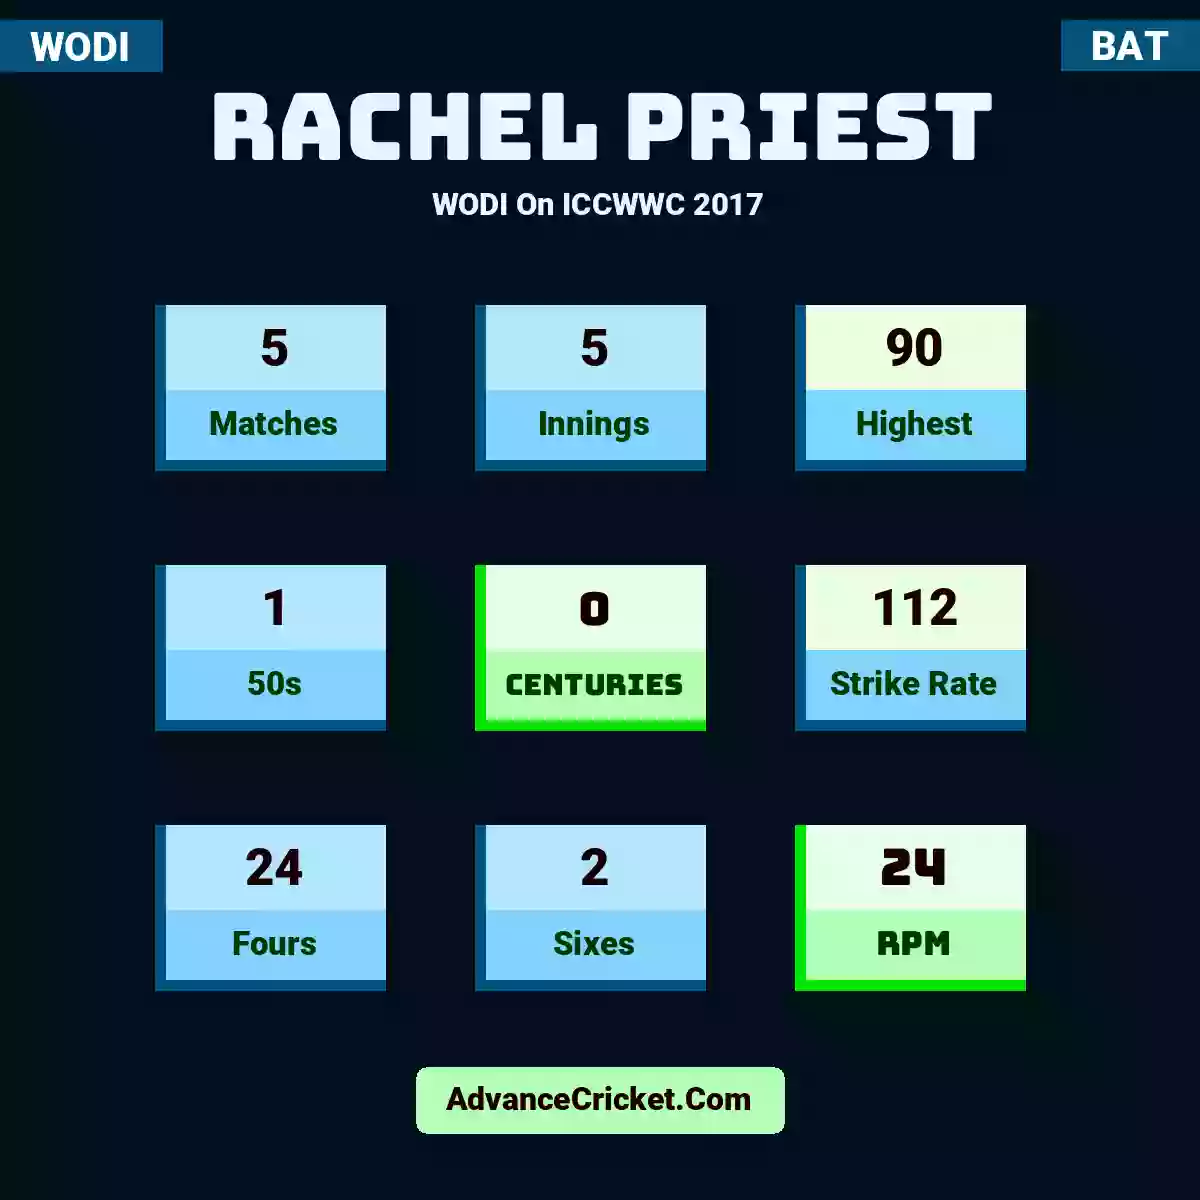 Rachel Priest WODI  On ICCWWC 2017, Rachel Priest played 5 matches, scored 90 runs as highest, 1 half-centuries, and 0 centuries, with a strike rate of 112. R.Priest hit 24 fours and 2 sixes, with an RPM of 24.